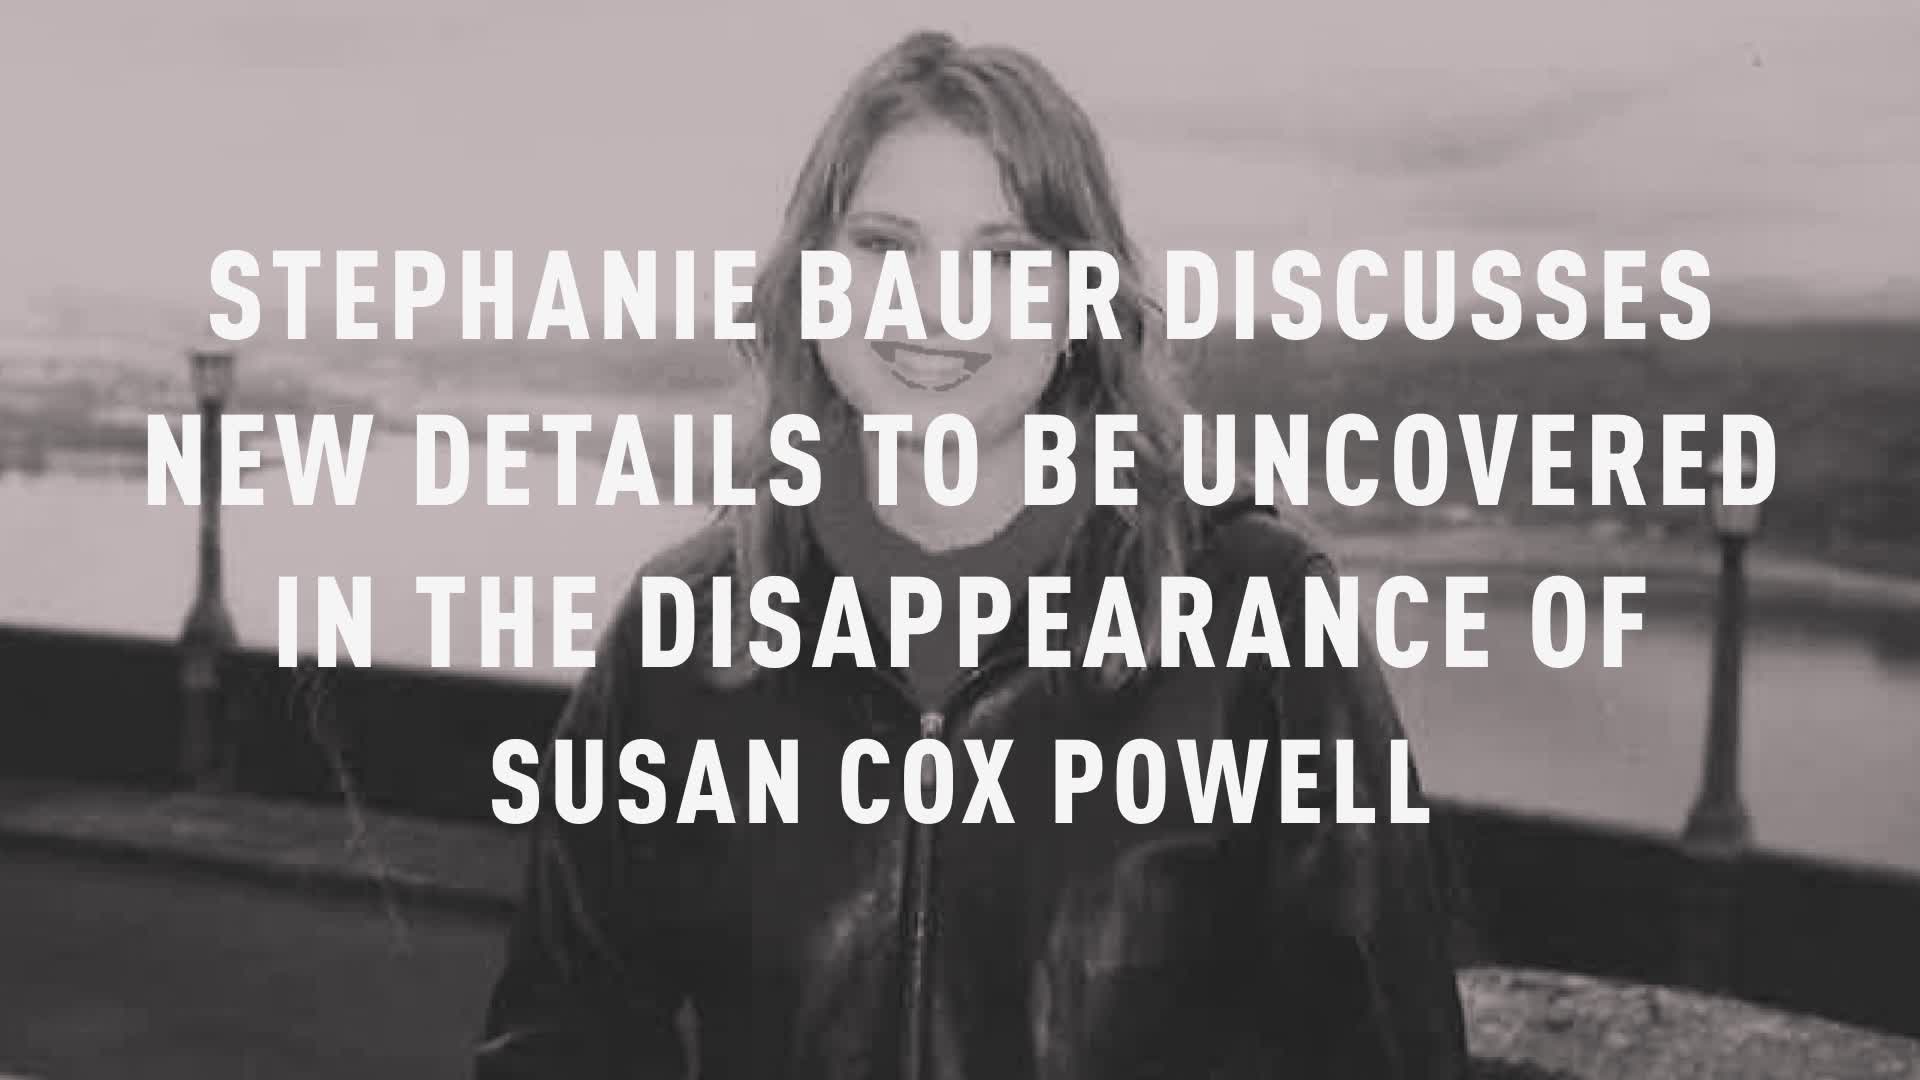 Stephanie Bauer Discusses New Evidence to Be Revealed in 'The Disappearance of Susan Cox Powell'